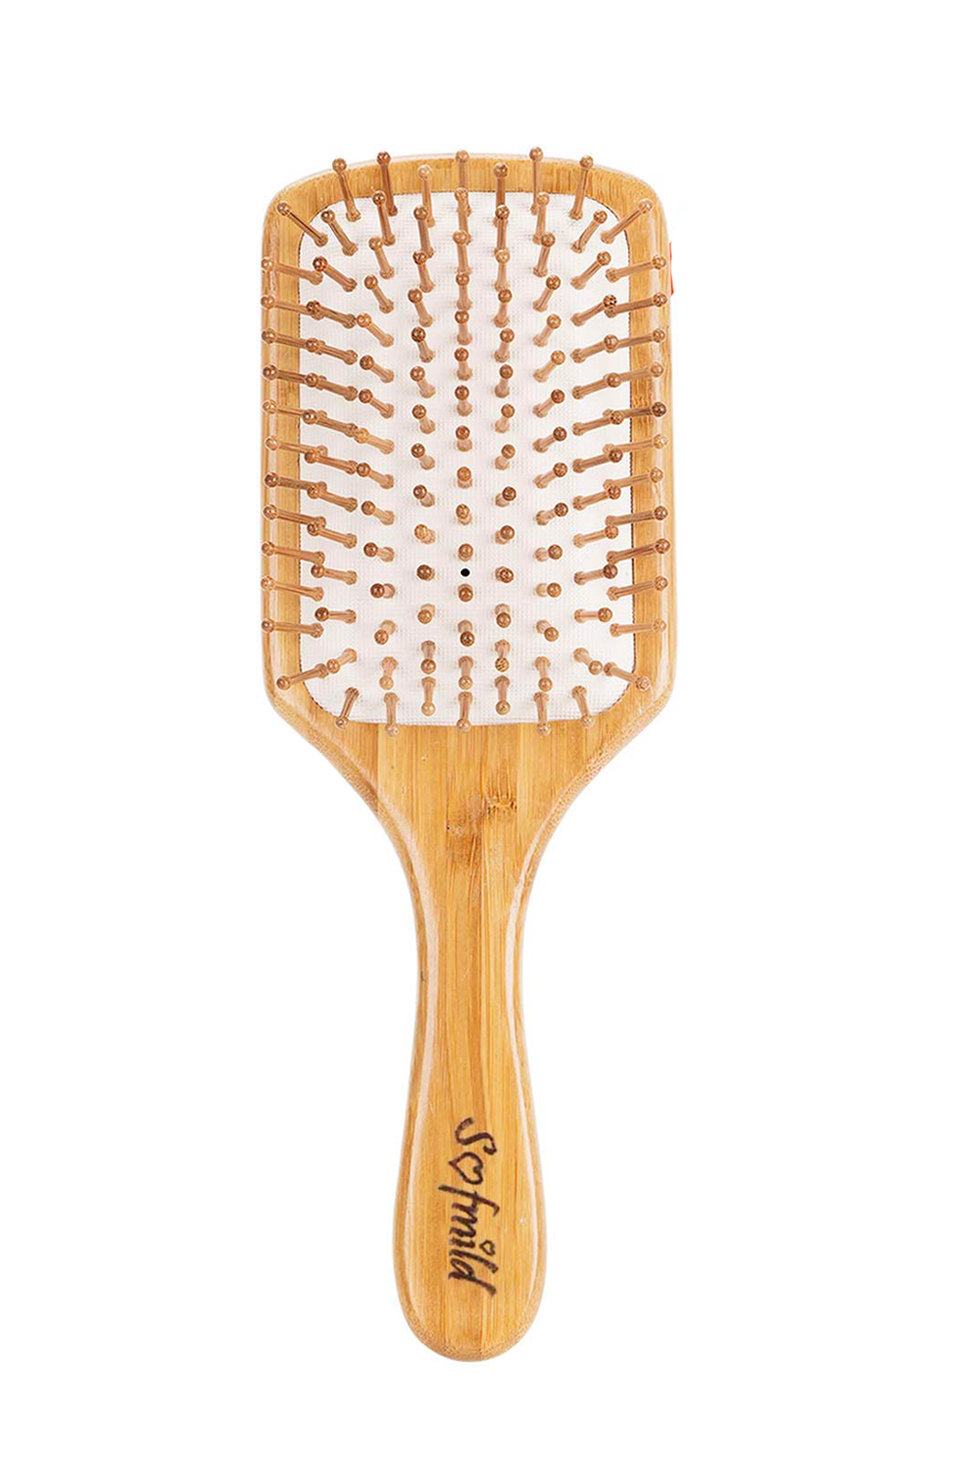 How to clean a hairbrush… – Home